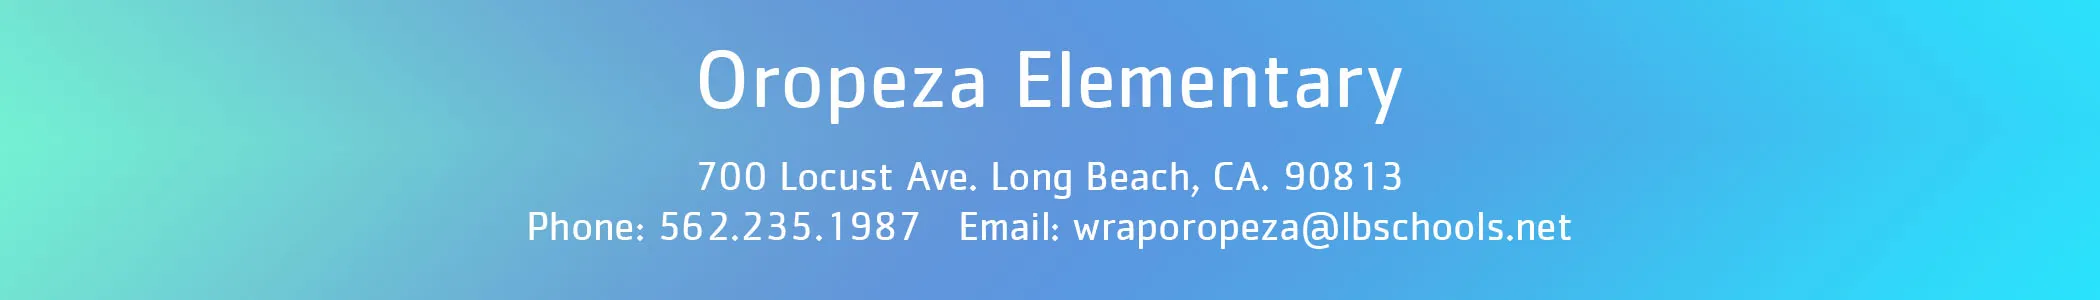 oropeza banner with site information